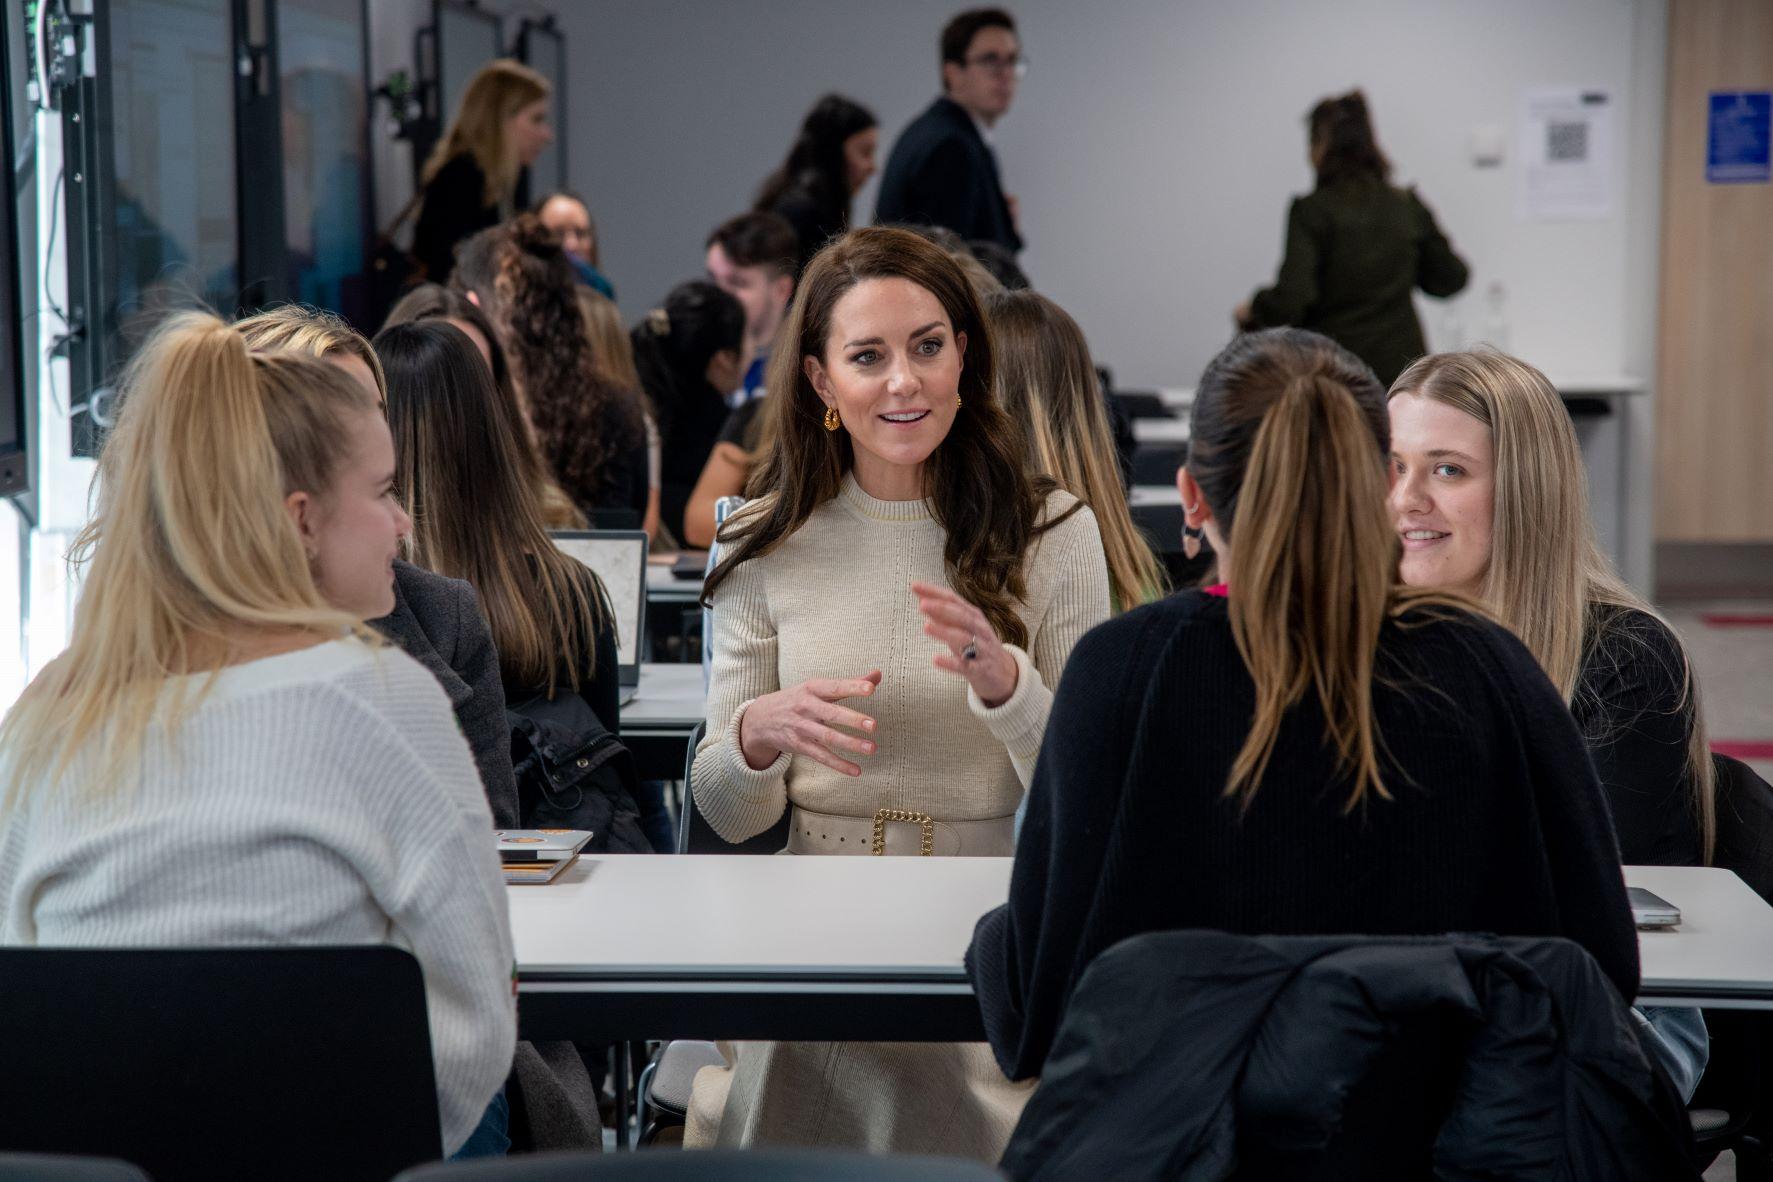 The Princess of Wales attends teaching session at School of Education